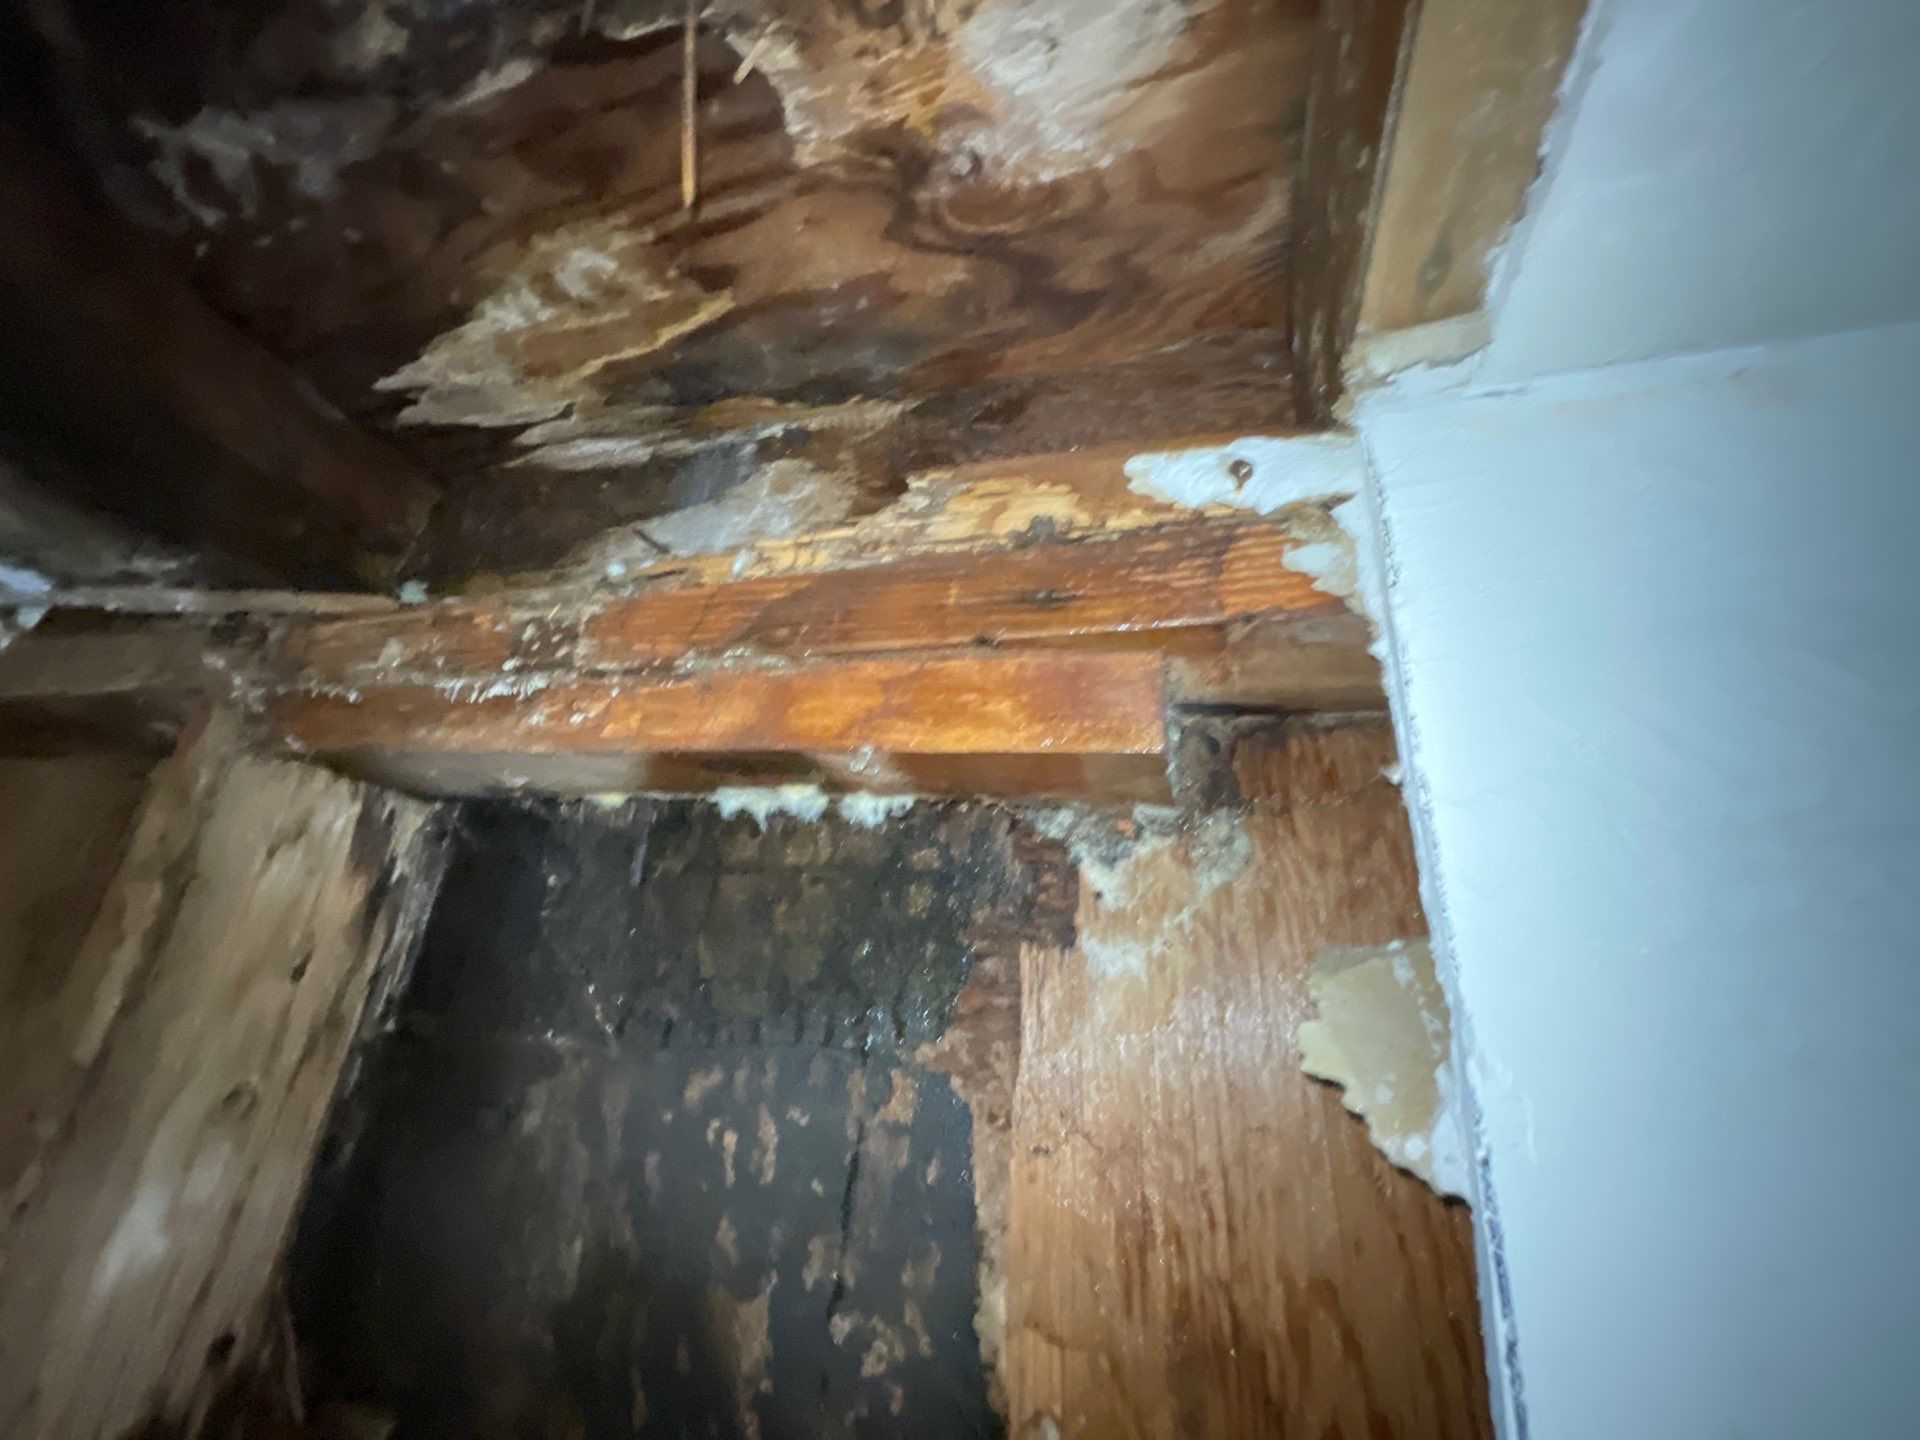 Crawl spaces are a common place to find mold.